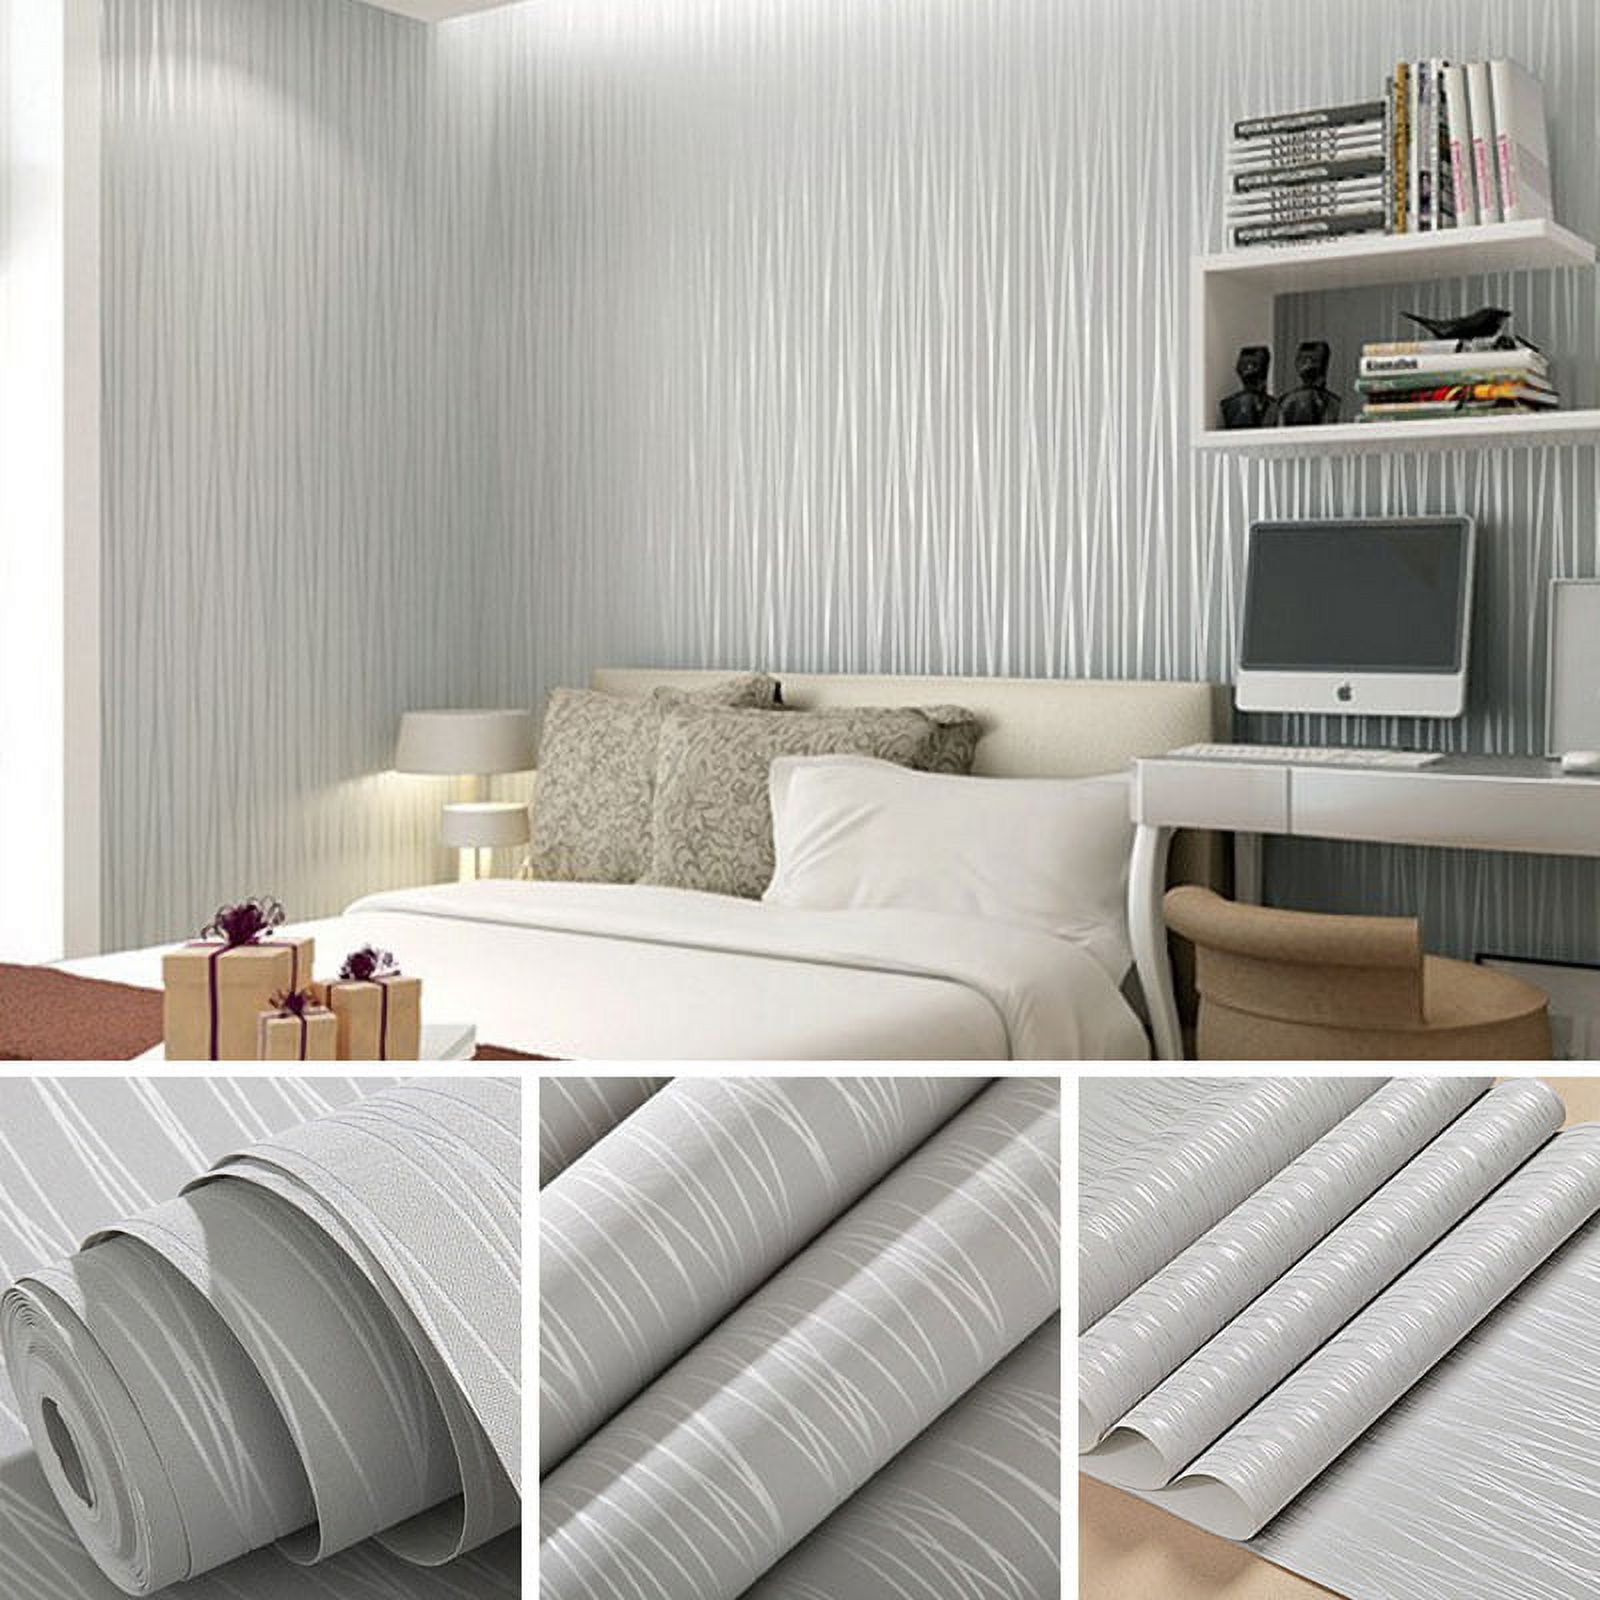 TOPCHANCES 3D Wallpaper, Modern Non-Woven Wallpaper Home Decor Wallpaper for Home Living Room Bedroom Indoor and TV Background Home Decoration - image 1 of 5